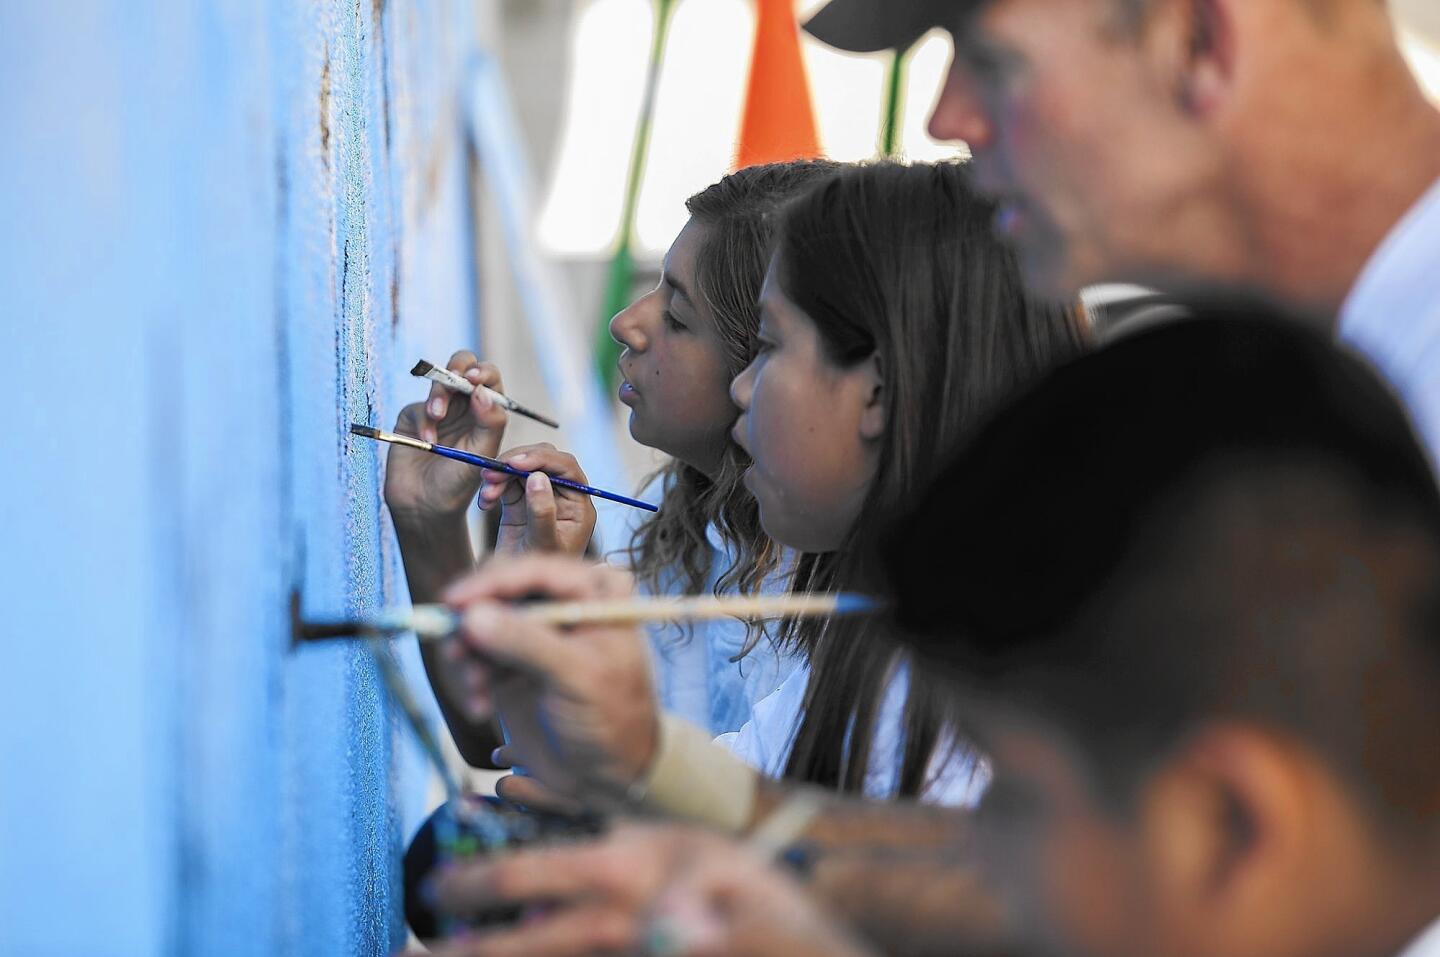 Michael Howard, founder of Operation Clean Slate, a mural-making organization, paints a mural with Rea Elementary school students Ricardo Contreras, 11, left, Xamantha Rocha, 11 and Alicia Airey, 10 on a wall at school on Tuesday.